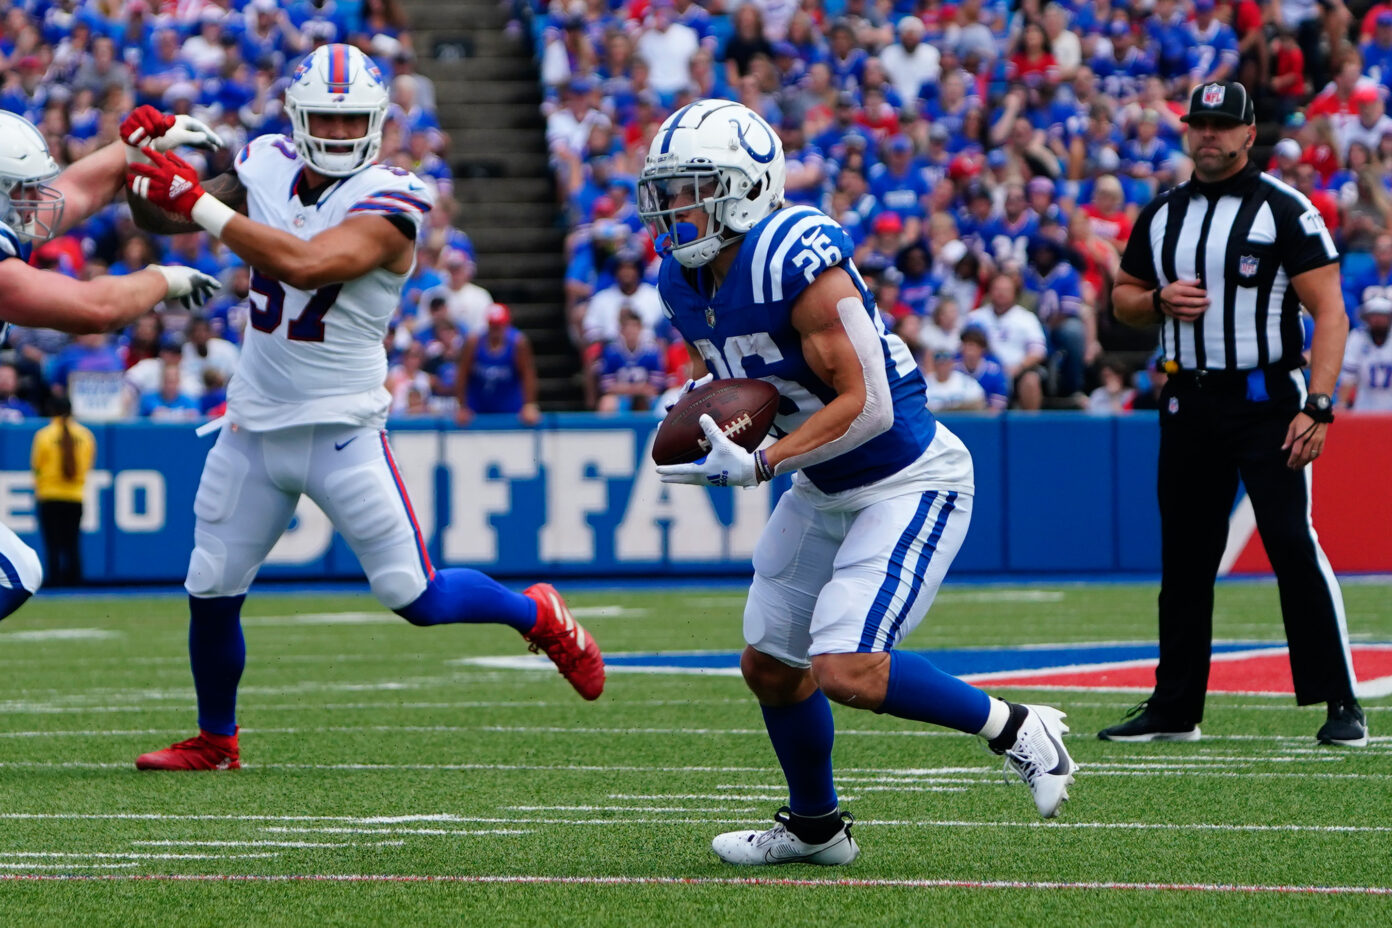 Evan Hull Fantasy Waiver Wire Should I Pick Up the Colts RB this Week?